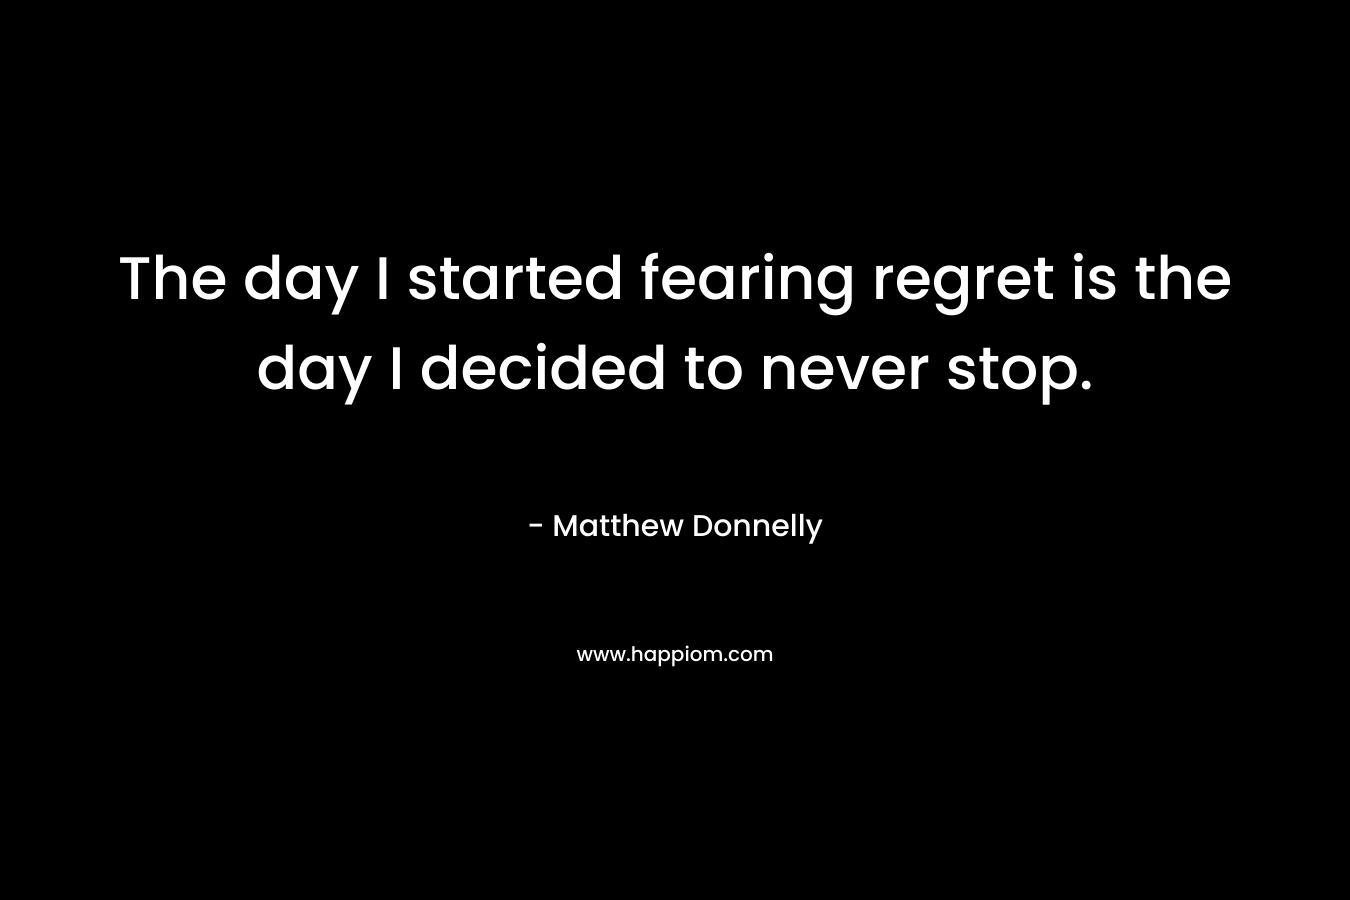 The day I started fearing regret is the day I decided to never stop. – Matthew Donnelly